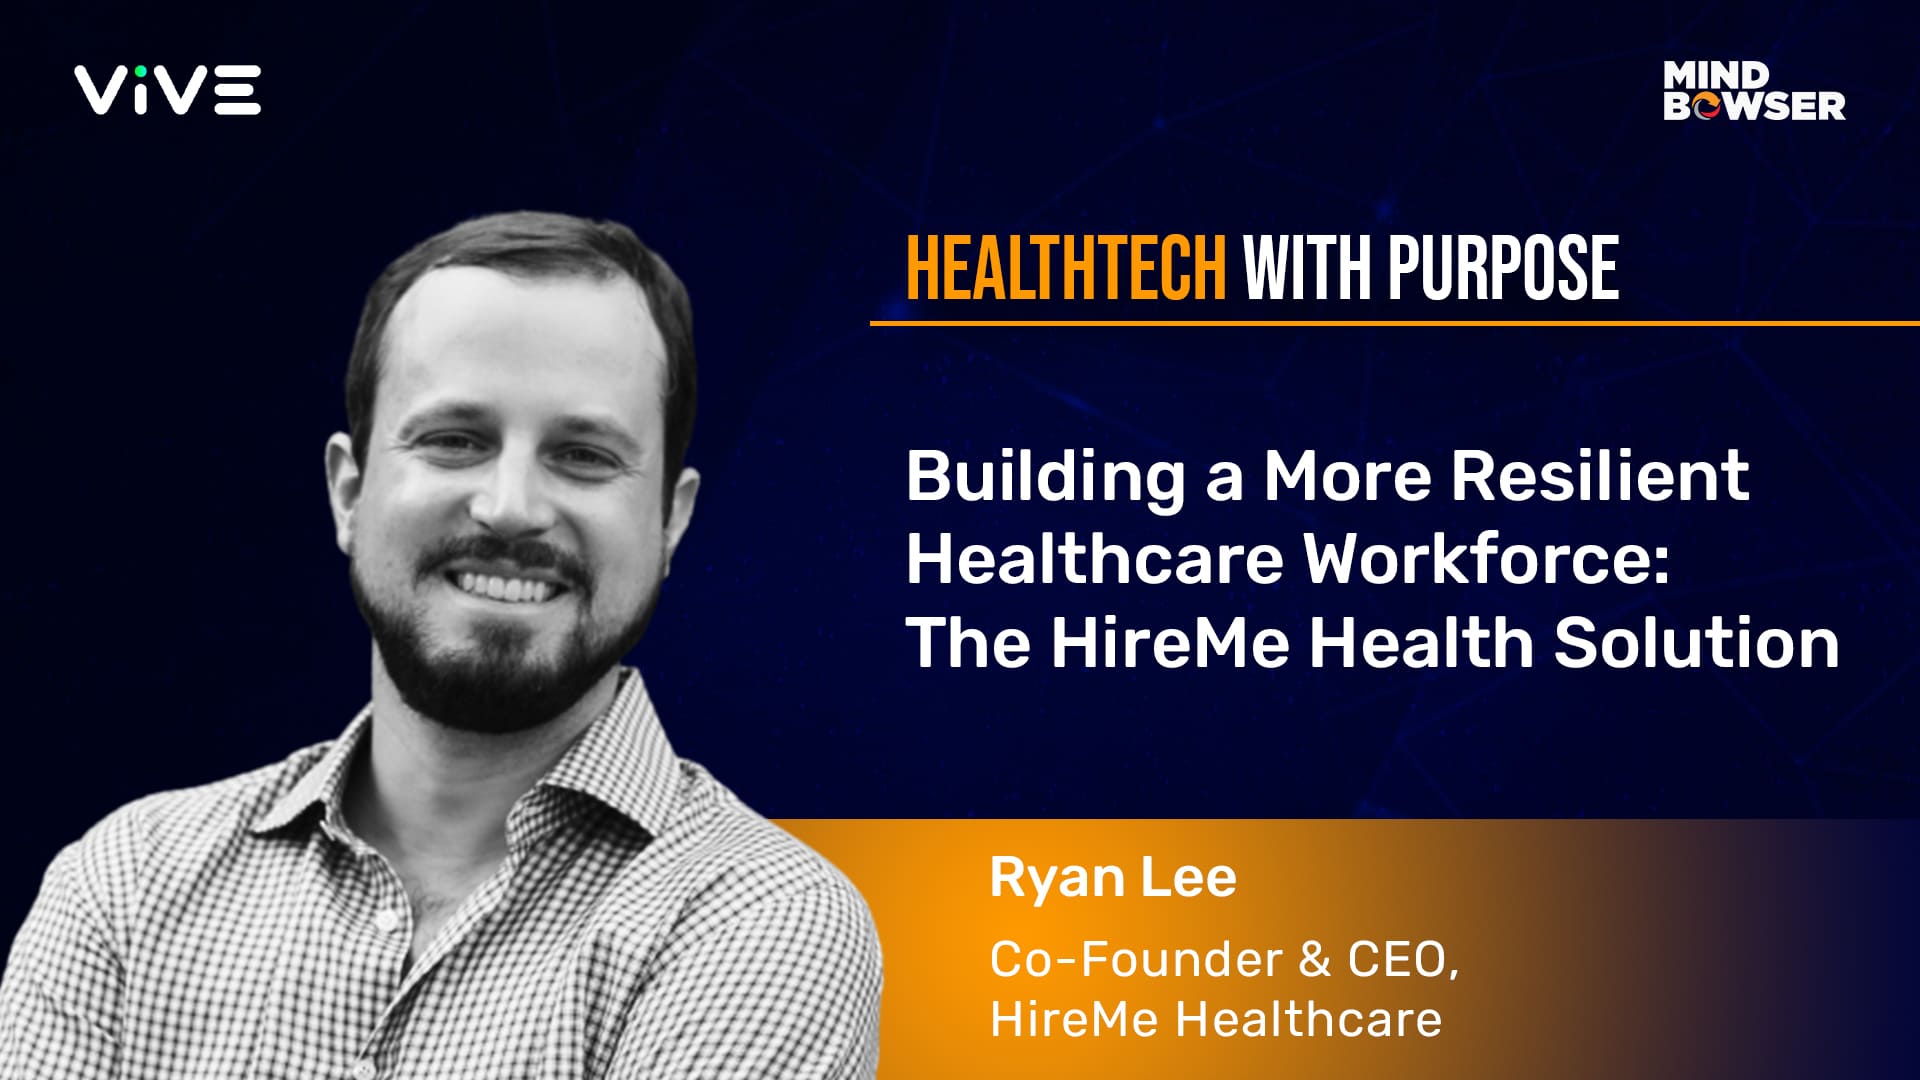 Building a More Resilient Healthcare Workforce - Podcast by Ryan Lee